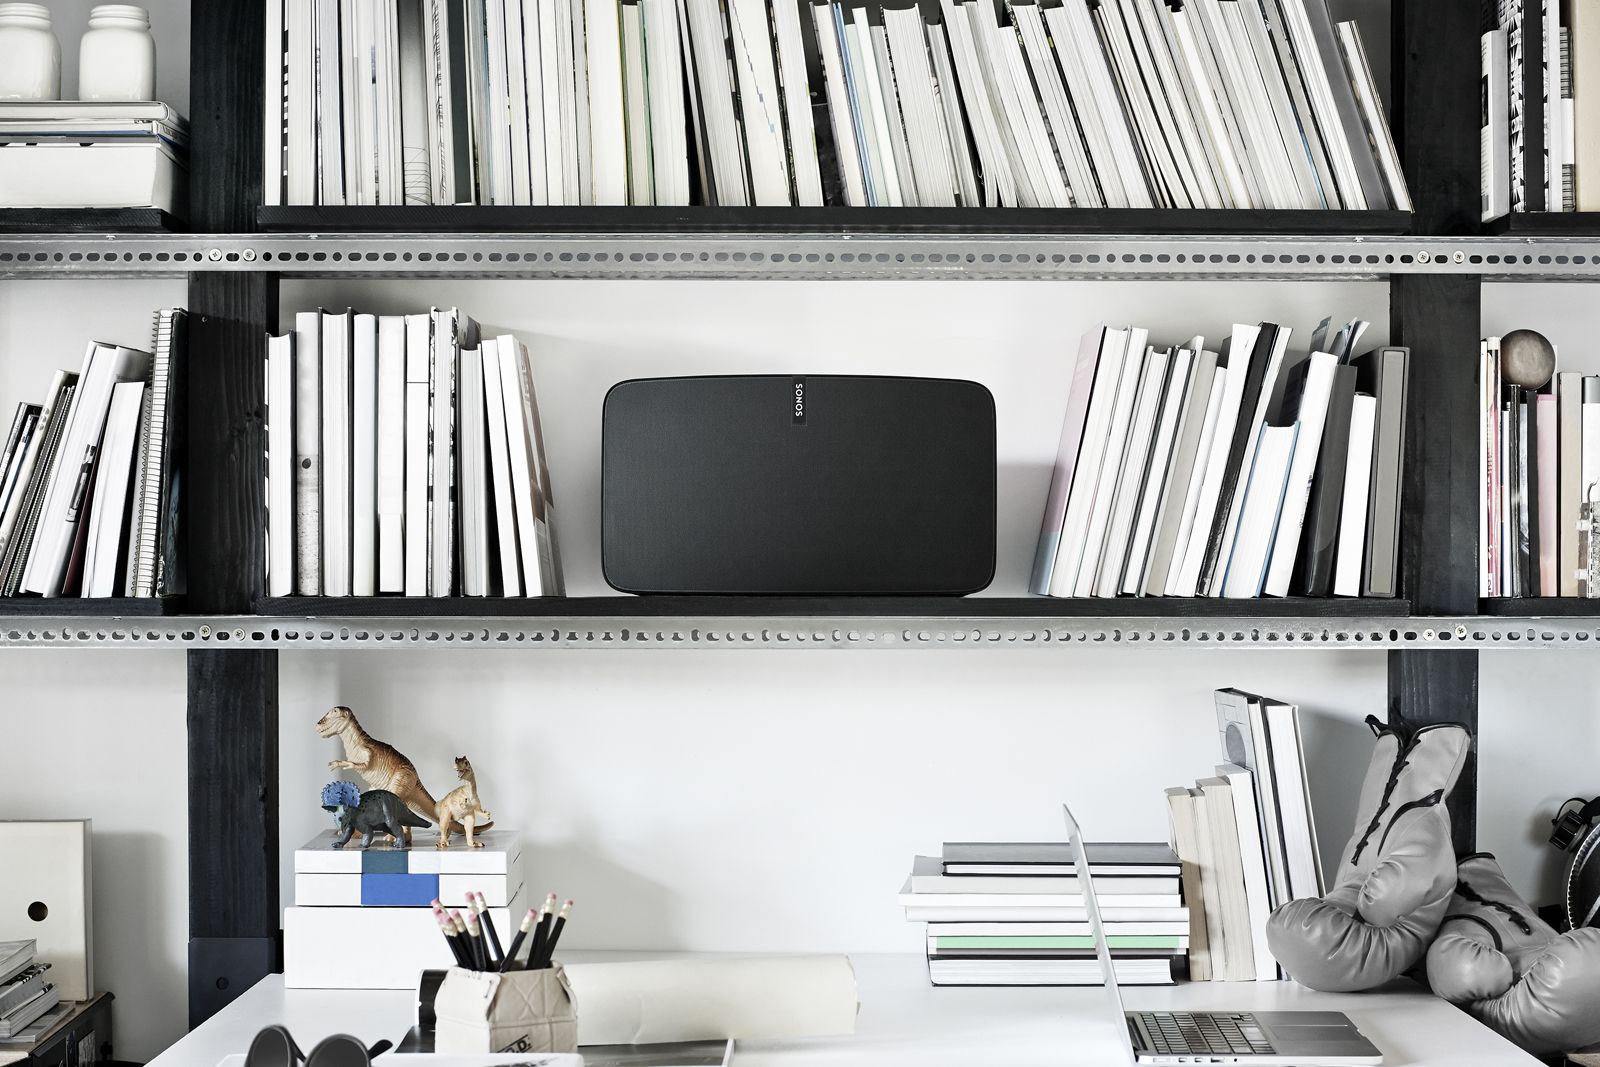 future of sonos new play 5 speaker and trueplay software announced but what s next image 1